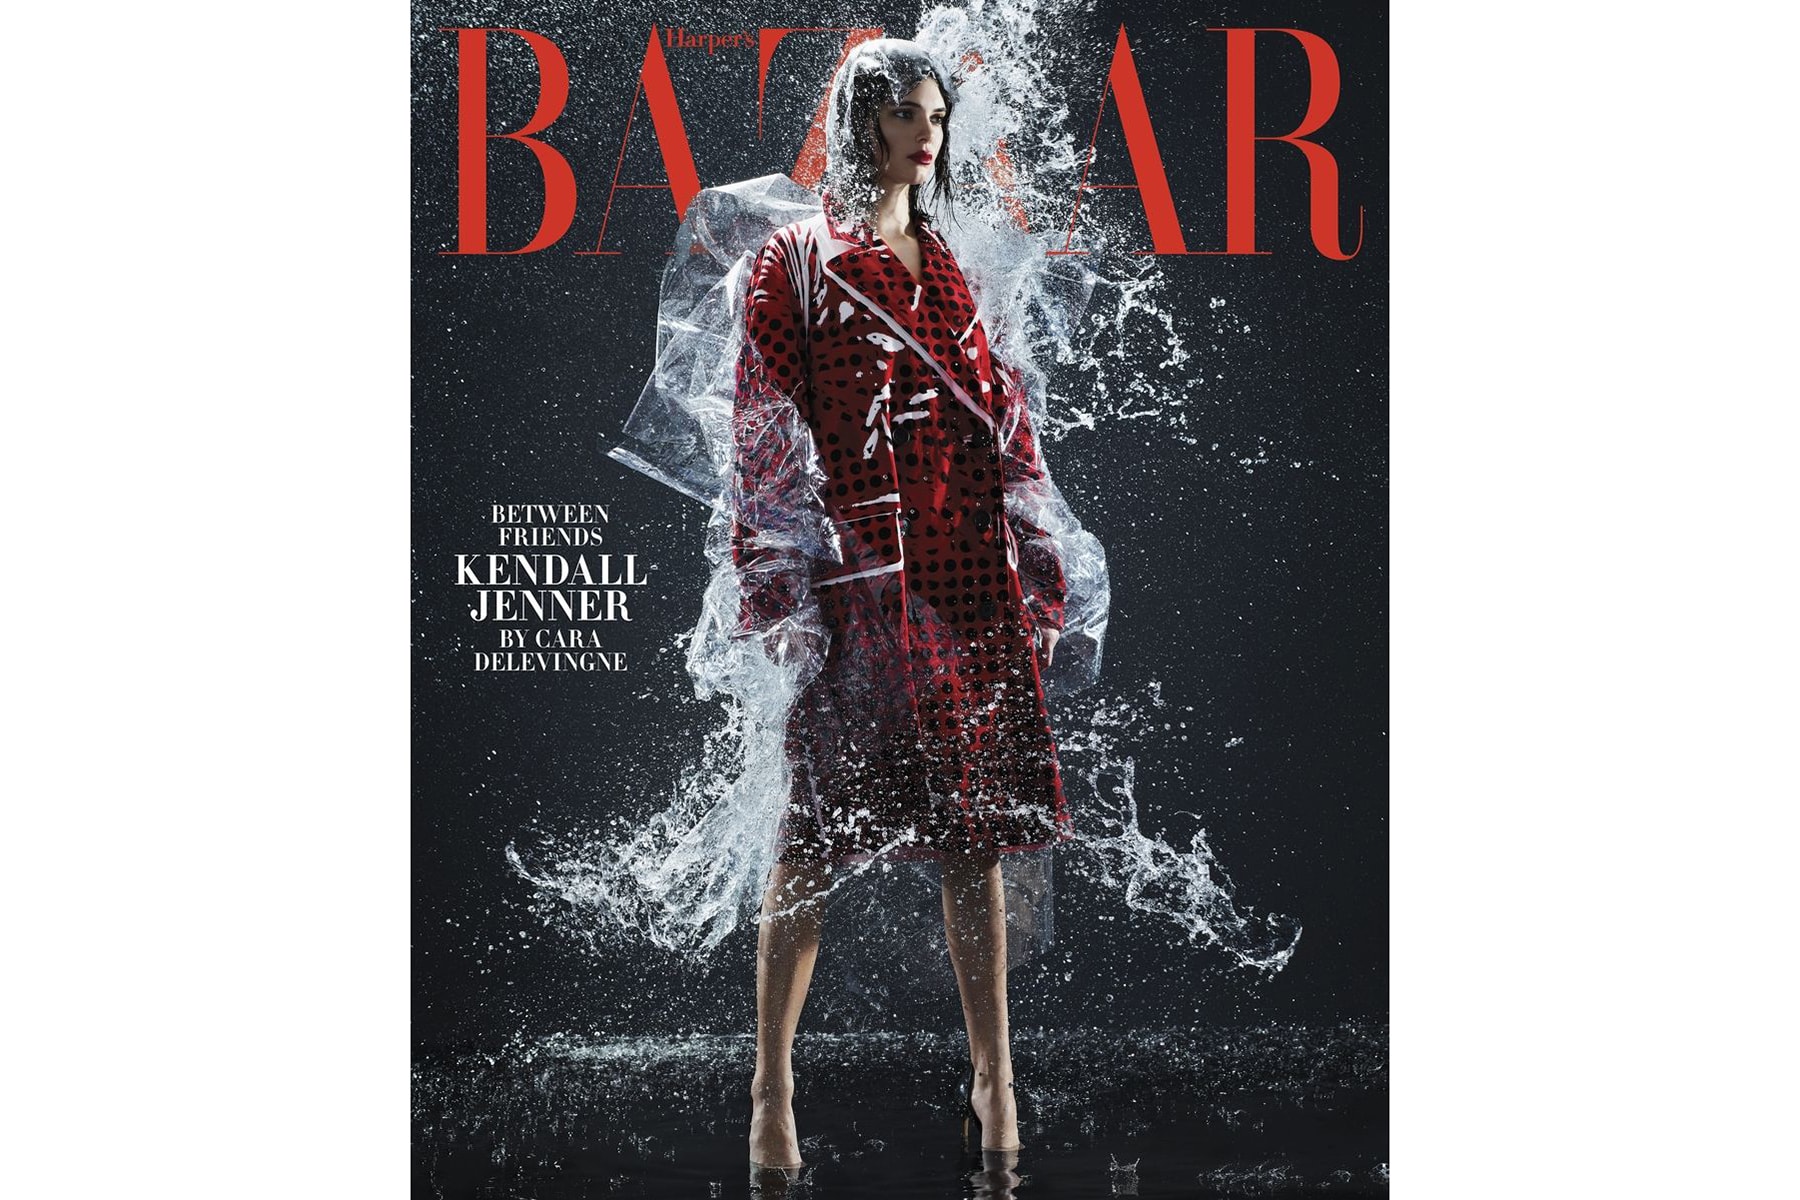 Kendall Jenner Interview Cara Delevingne Harpers Bazaar February 2018 Issue Cover Editorial Supermodel Model